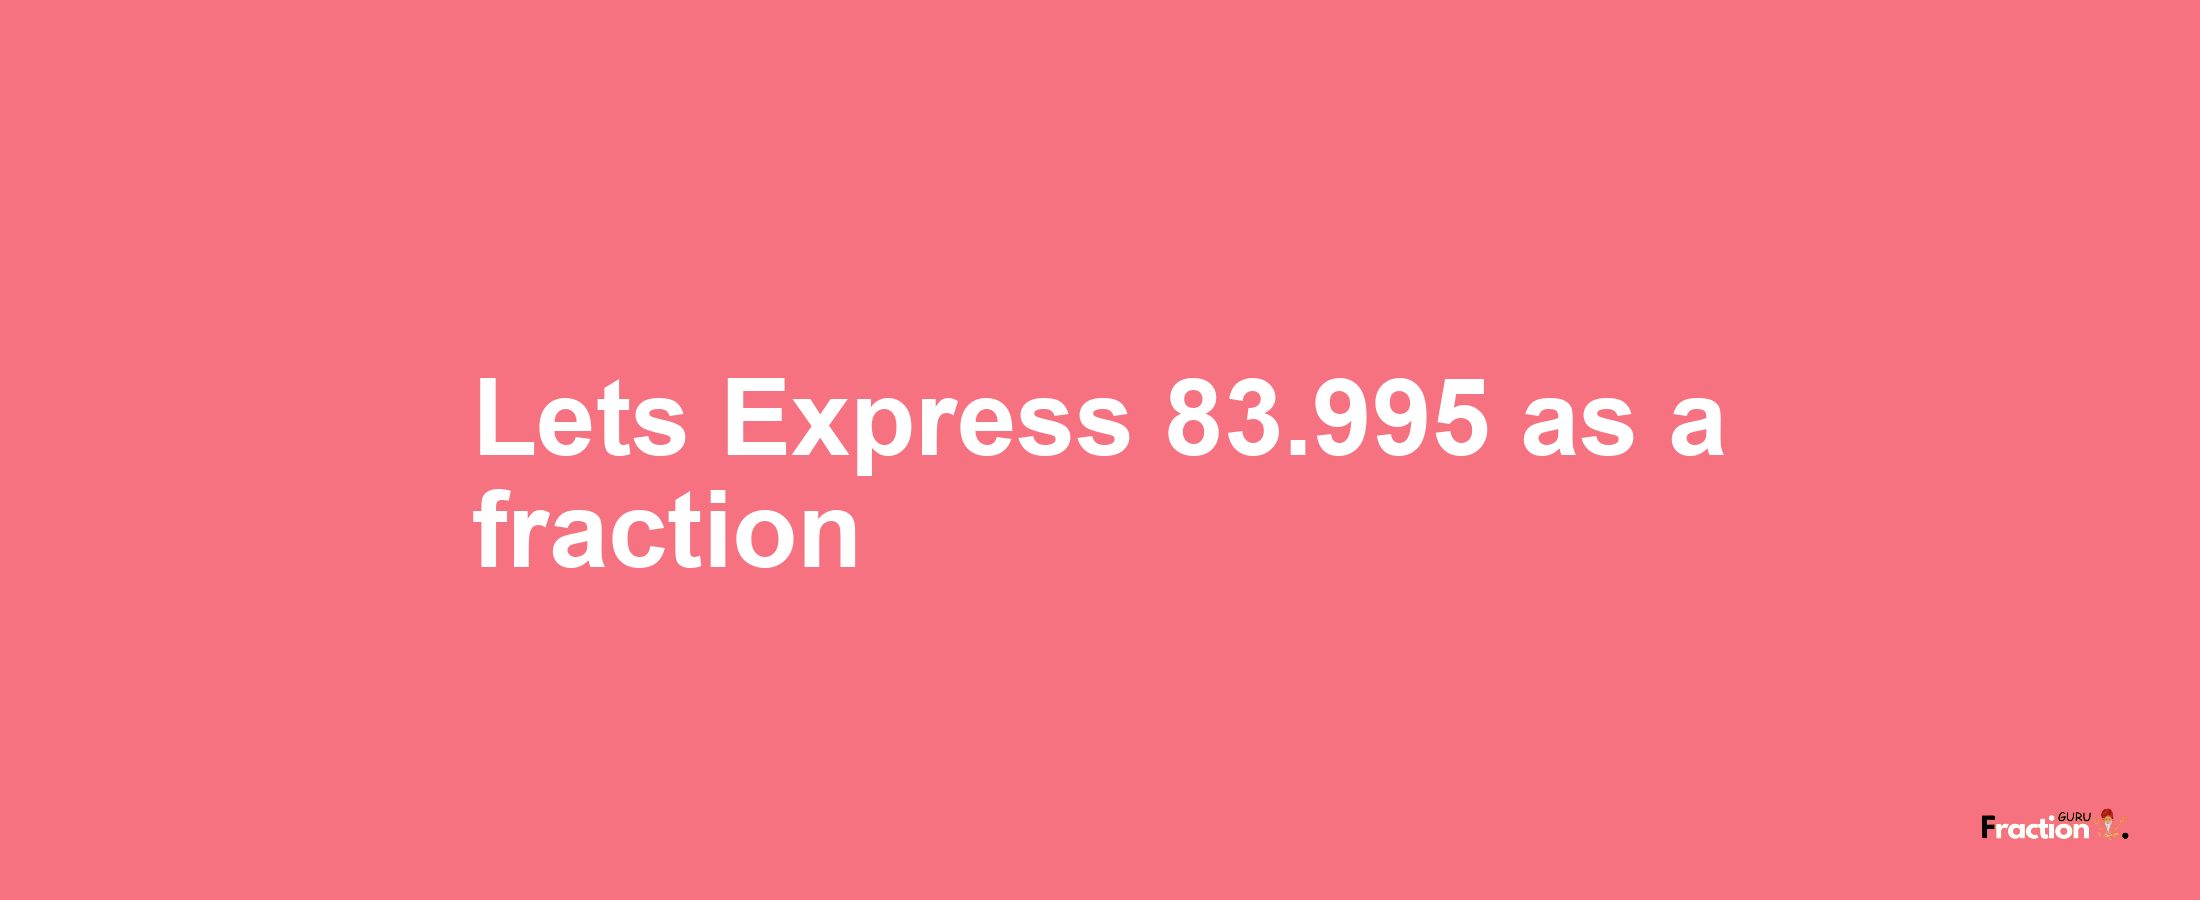 Lets Express 83.995 as afraction